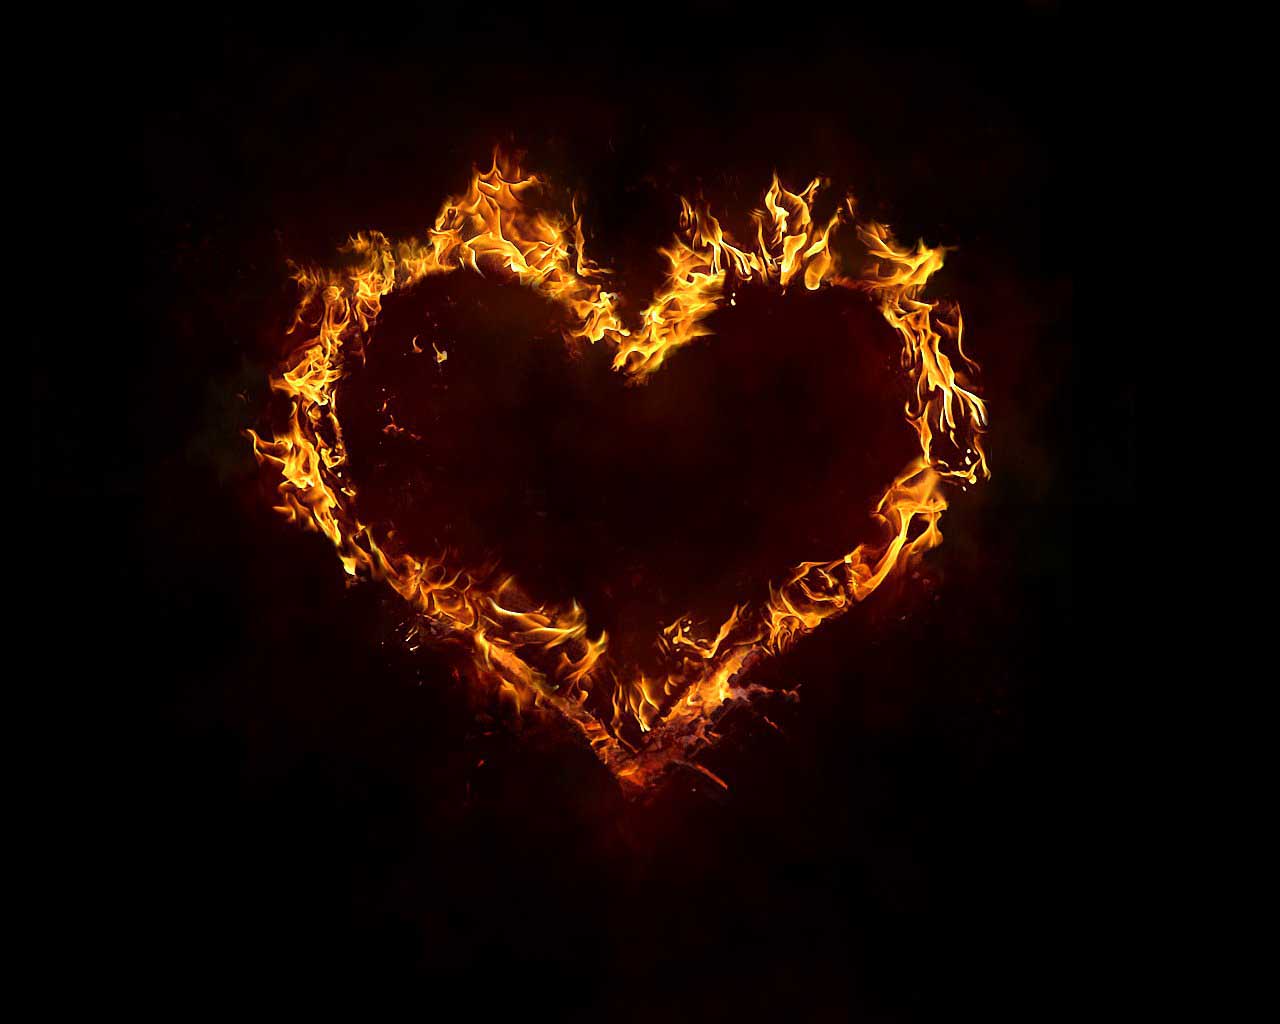 Heart On Fire Live Wallpaper - free download